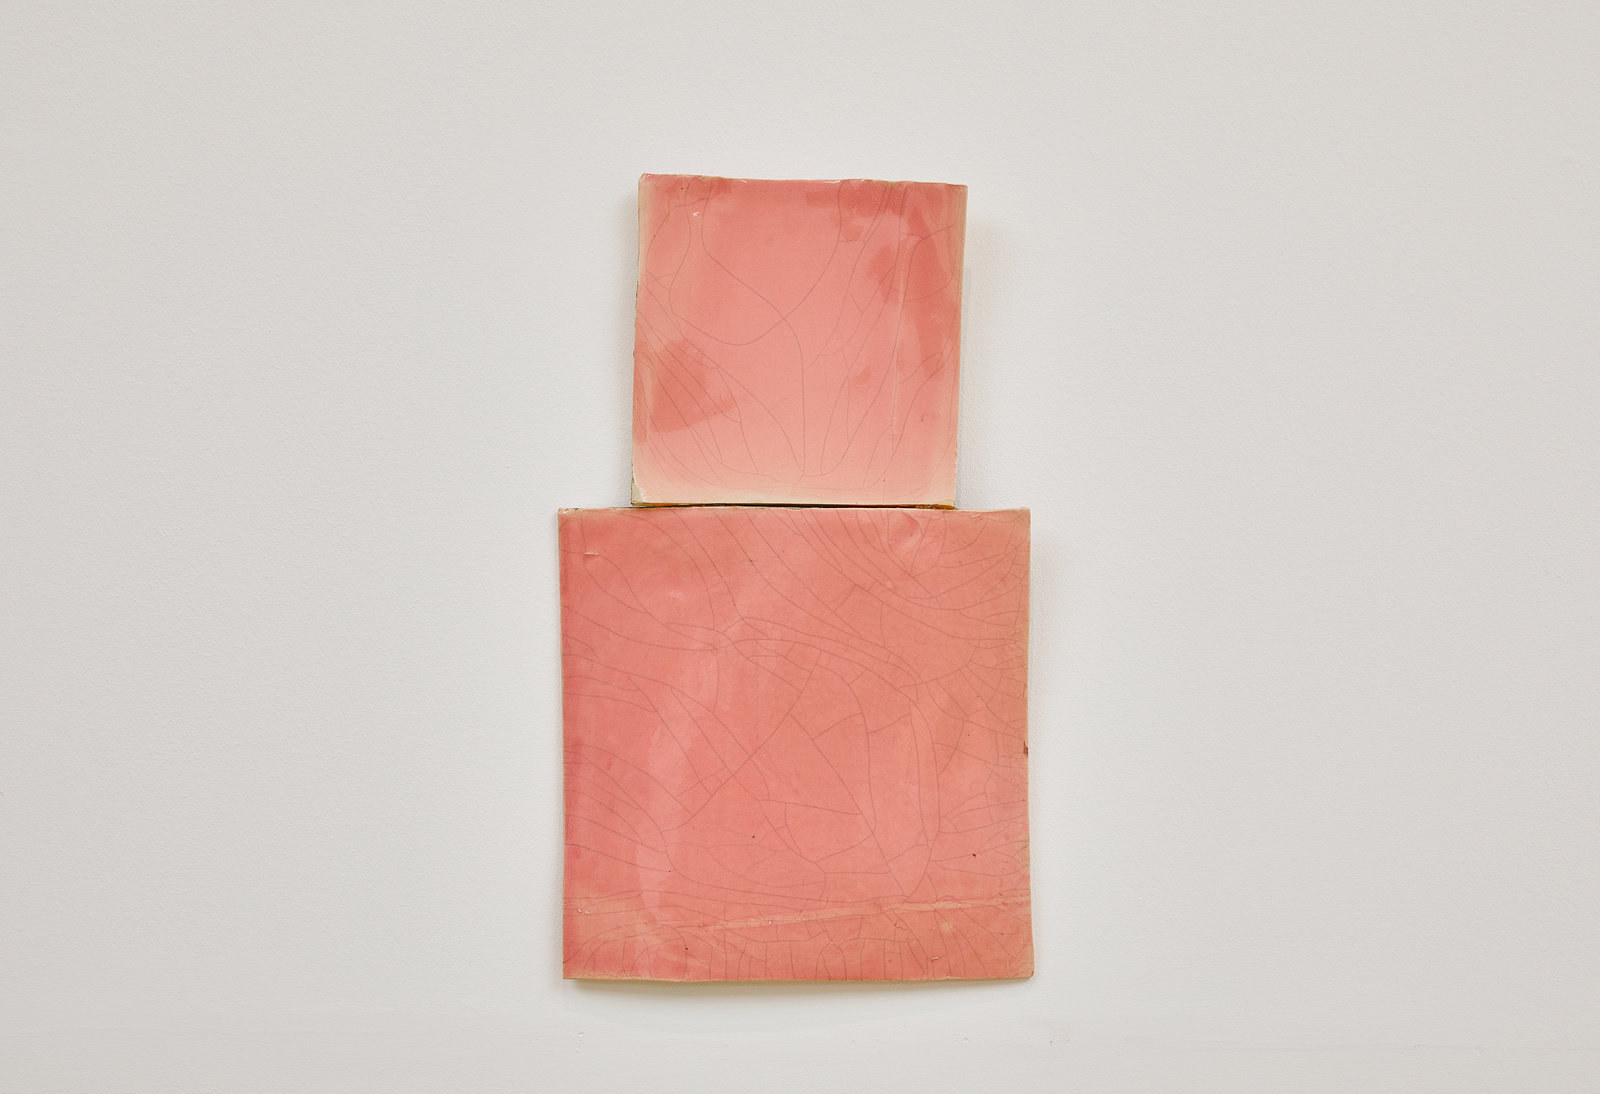 A smaller glazed, pink porcelain square is hung directly above a slightly larger glazed, pink porcelain square by Mary Heilmann.